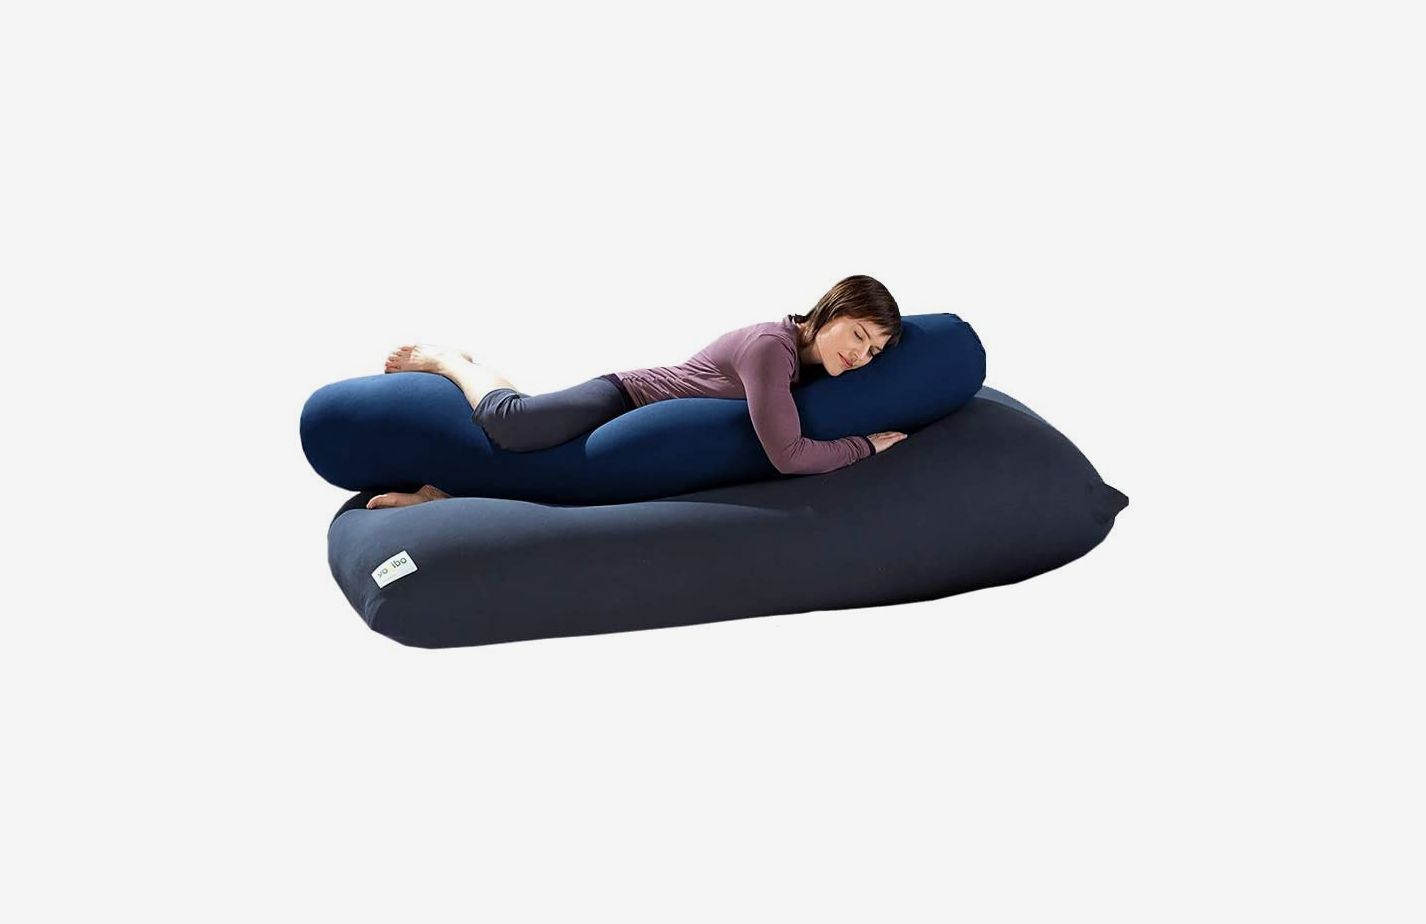 The 16 Best Body Pillows for Cuddling, Squeezing, and Making You